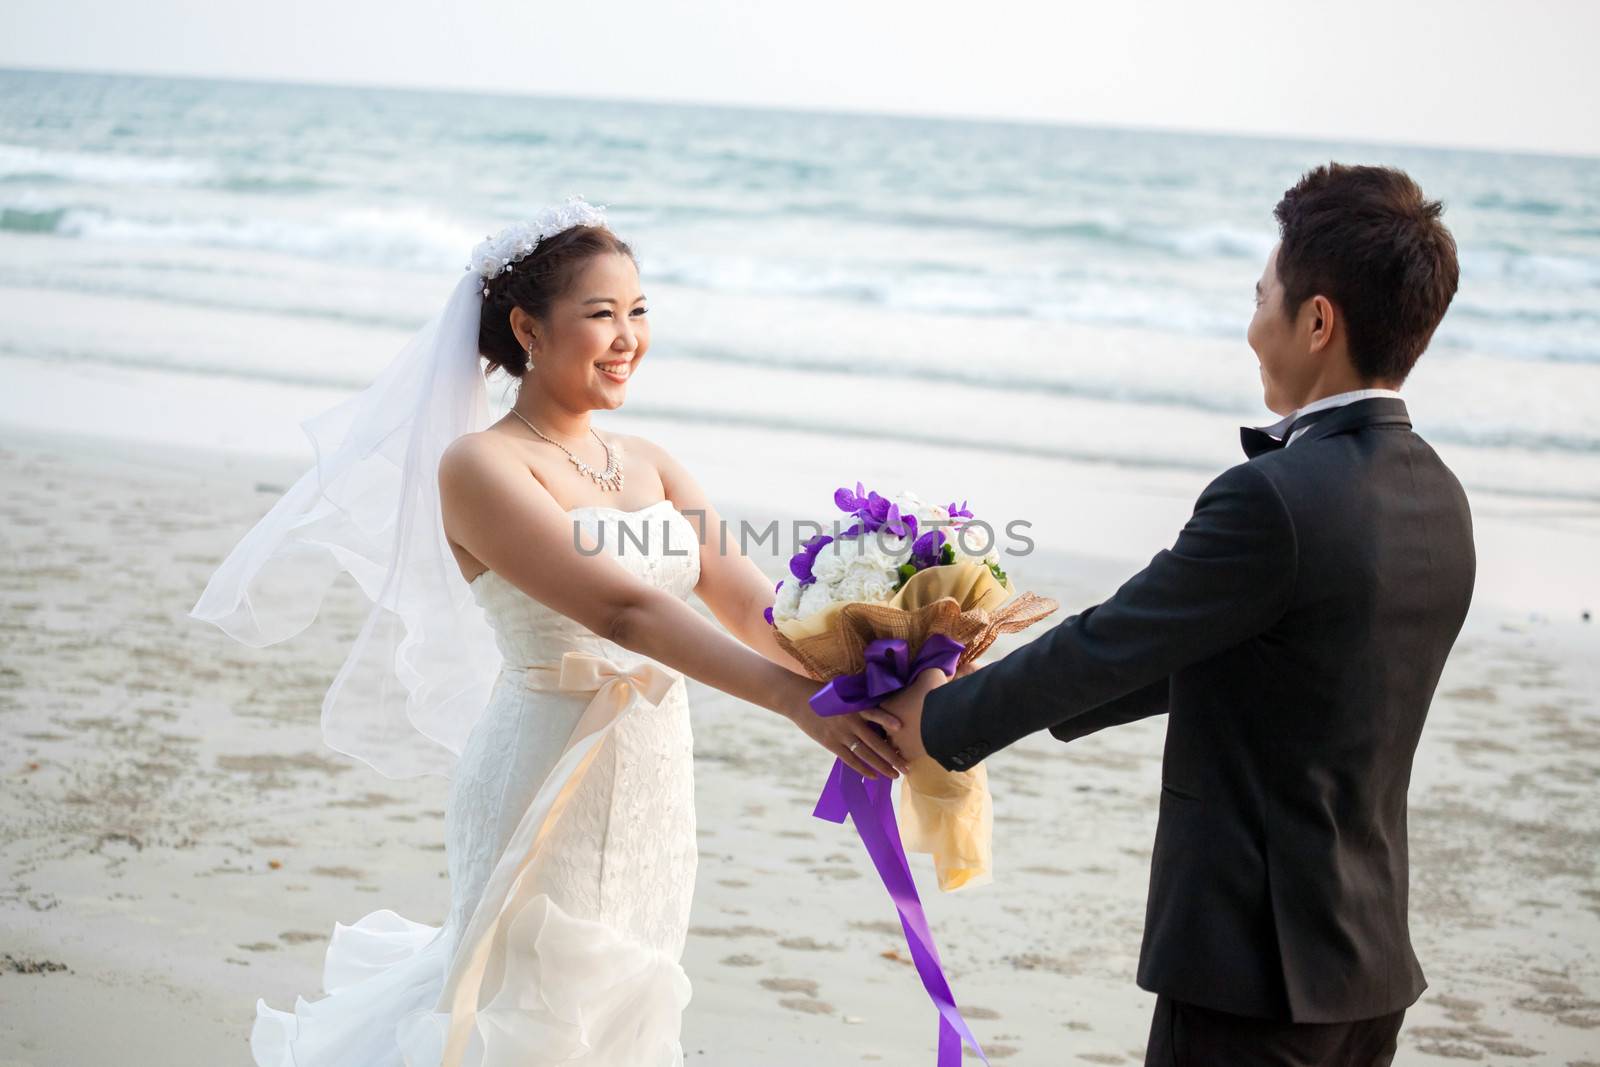 Wedding Couple at beach by vichie81